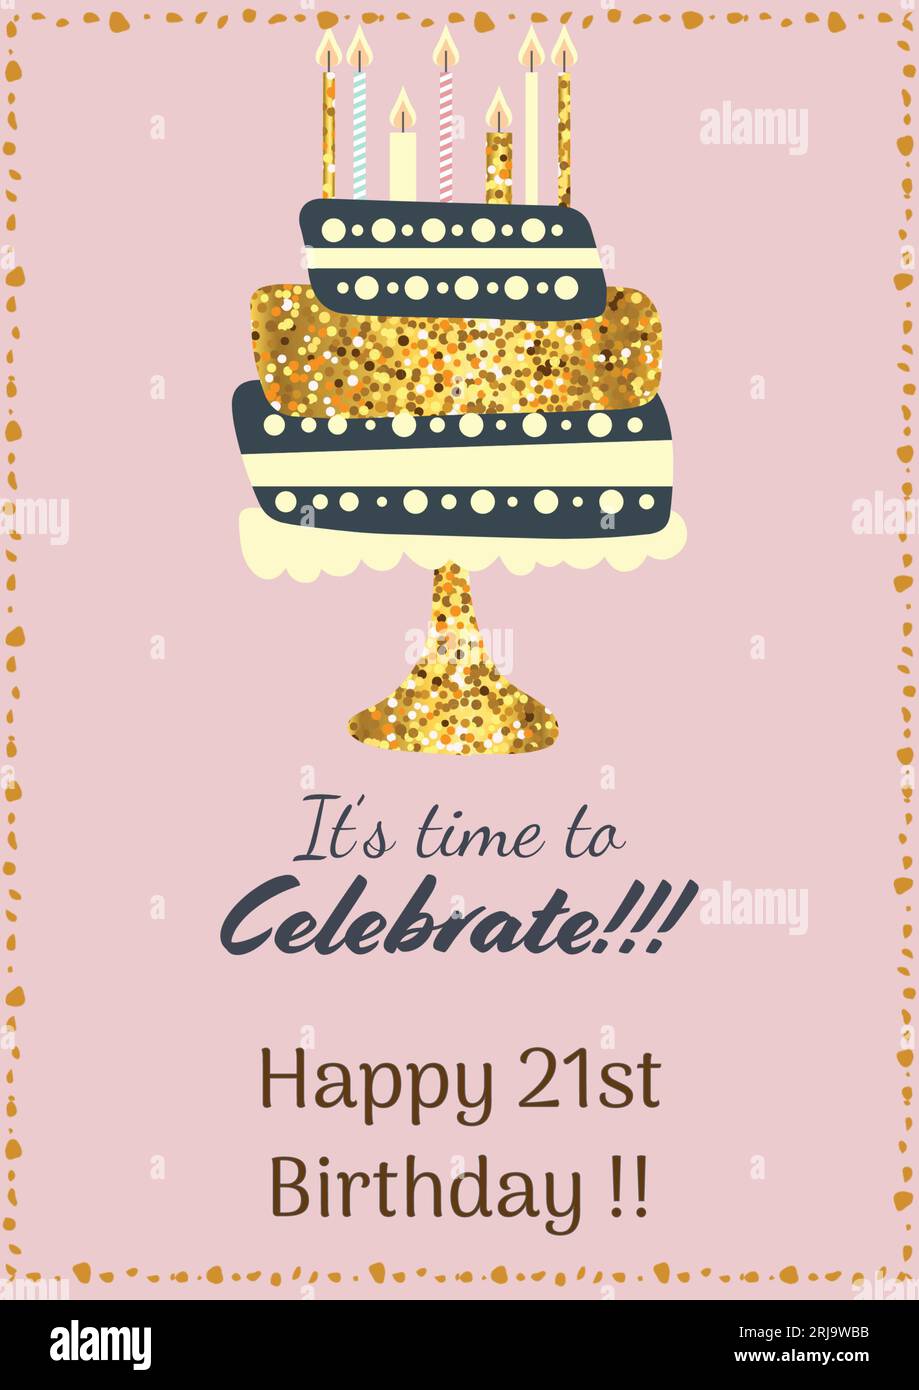 Composition of it's time to celebrate happy 21st birthday text over birthday cake on pink background Stock Photo